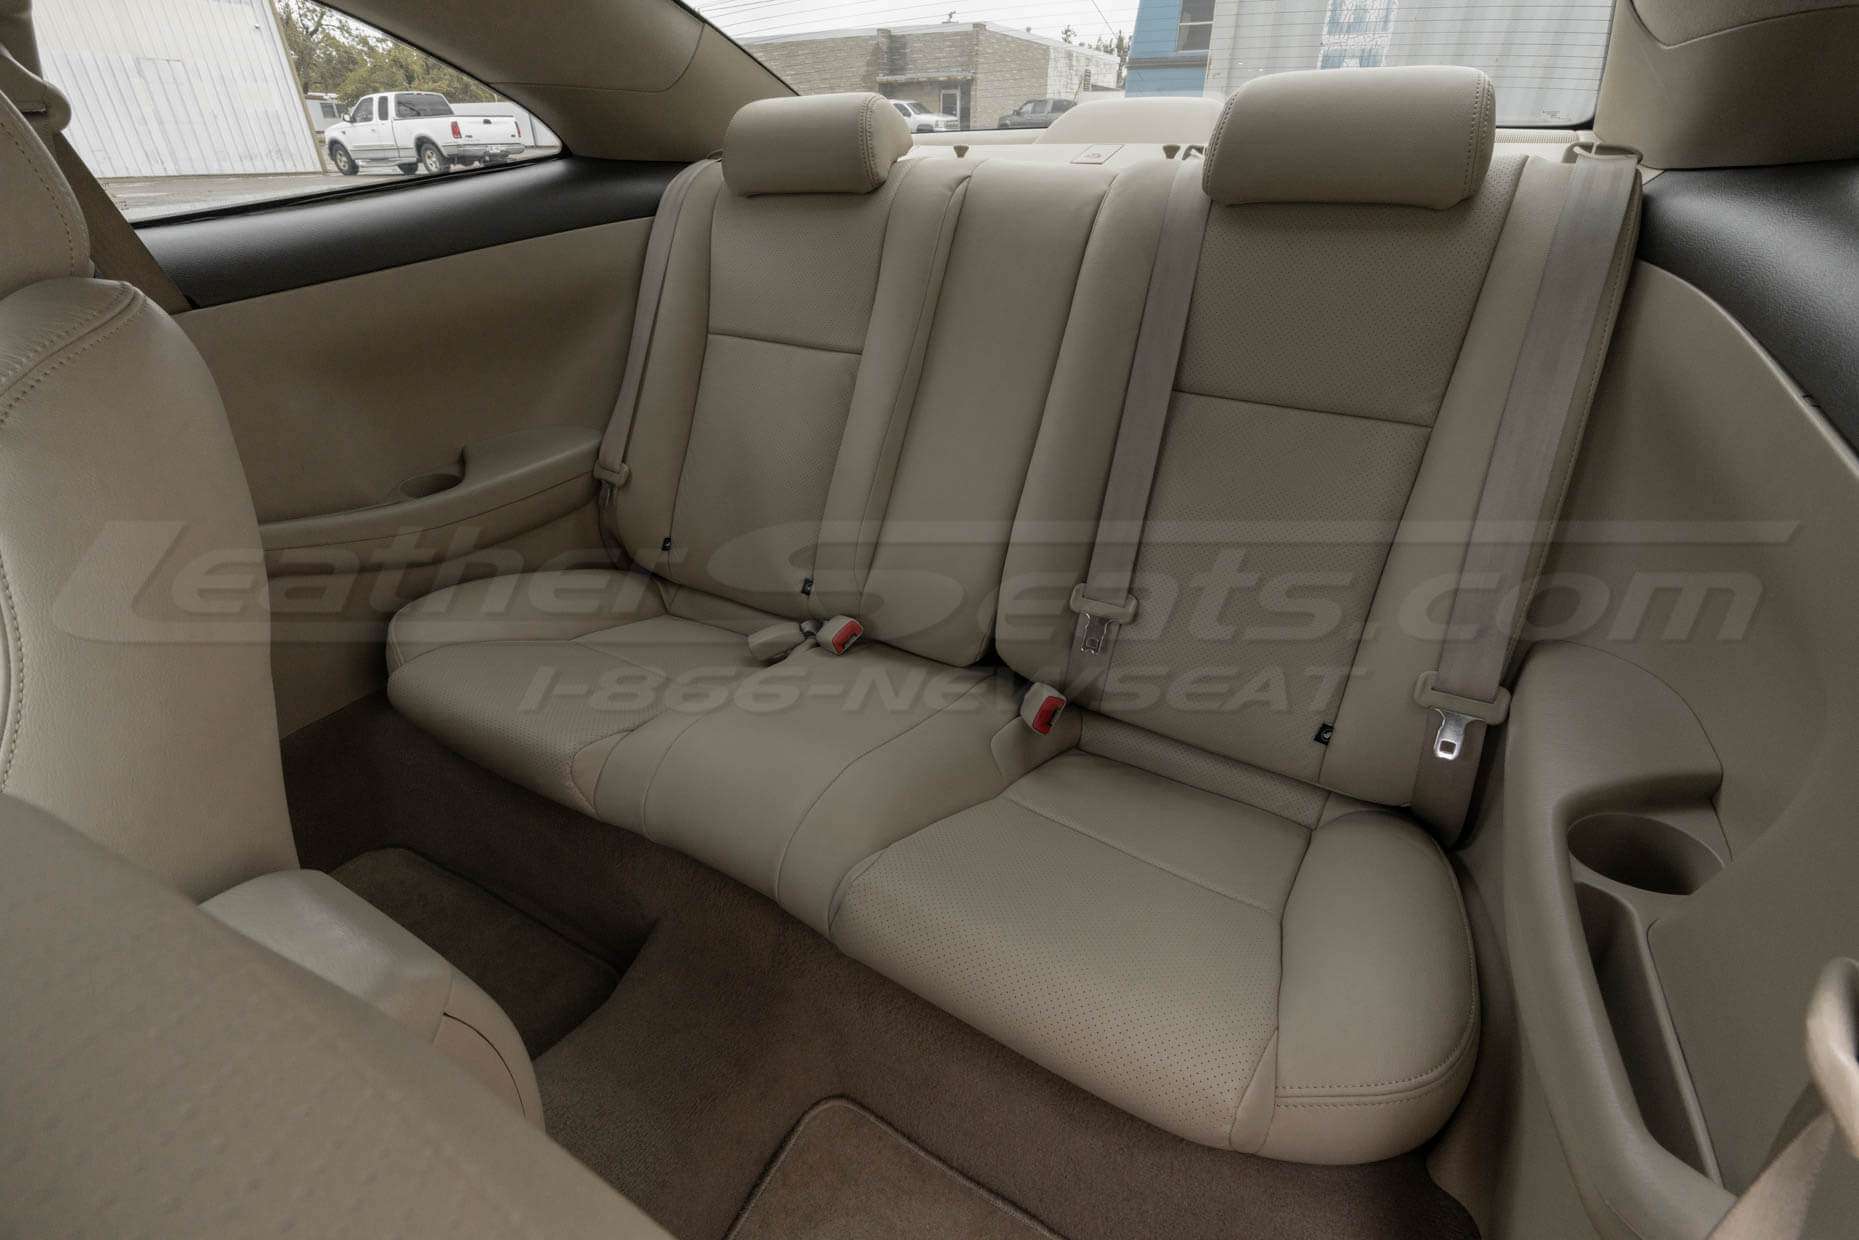 04-09 Toyota Solara Installed Leather Seats - Ivory - Rear seats from driver's side